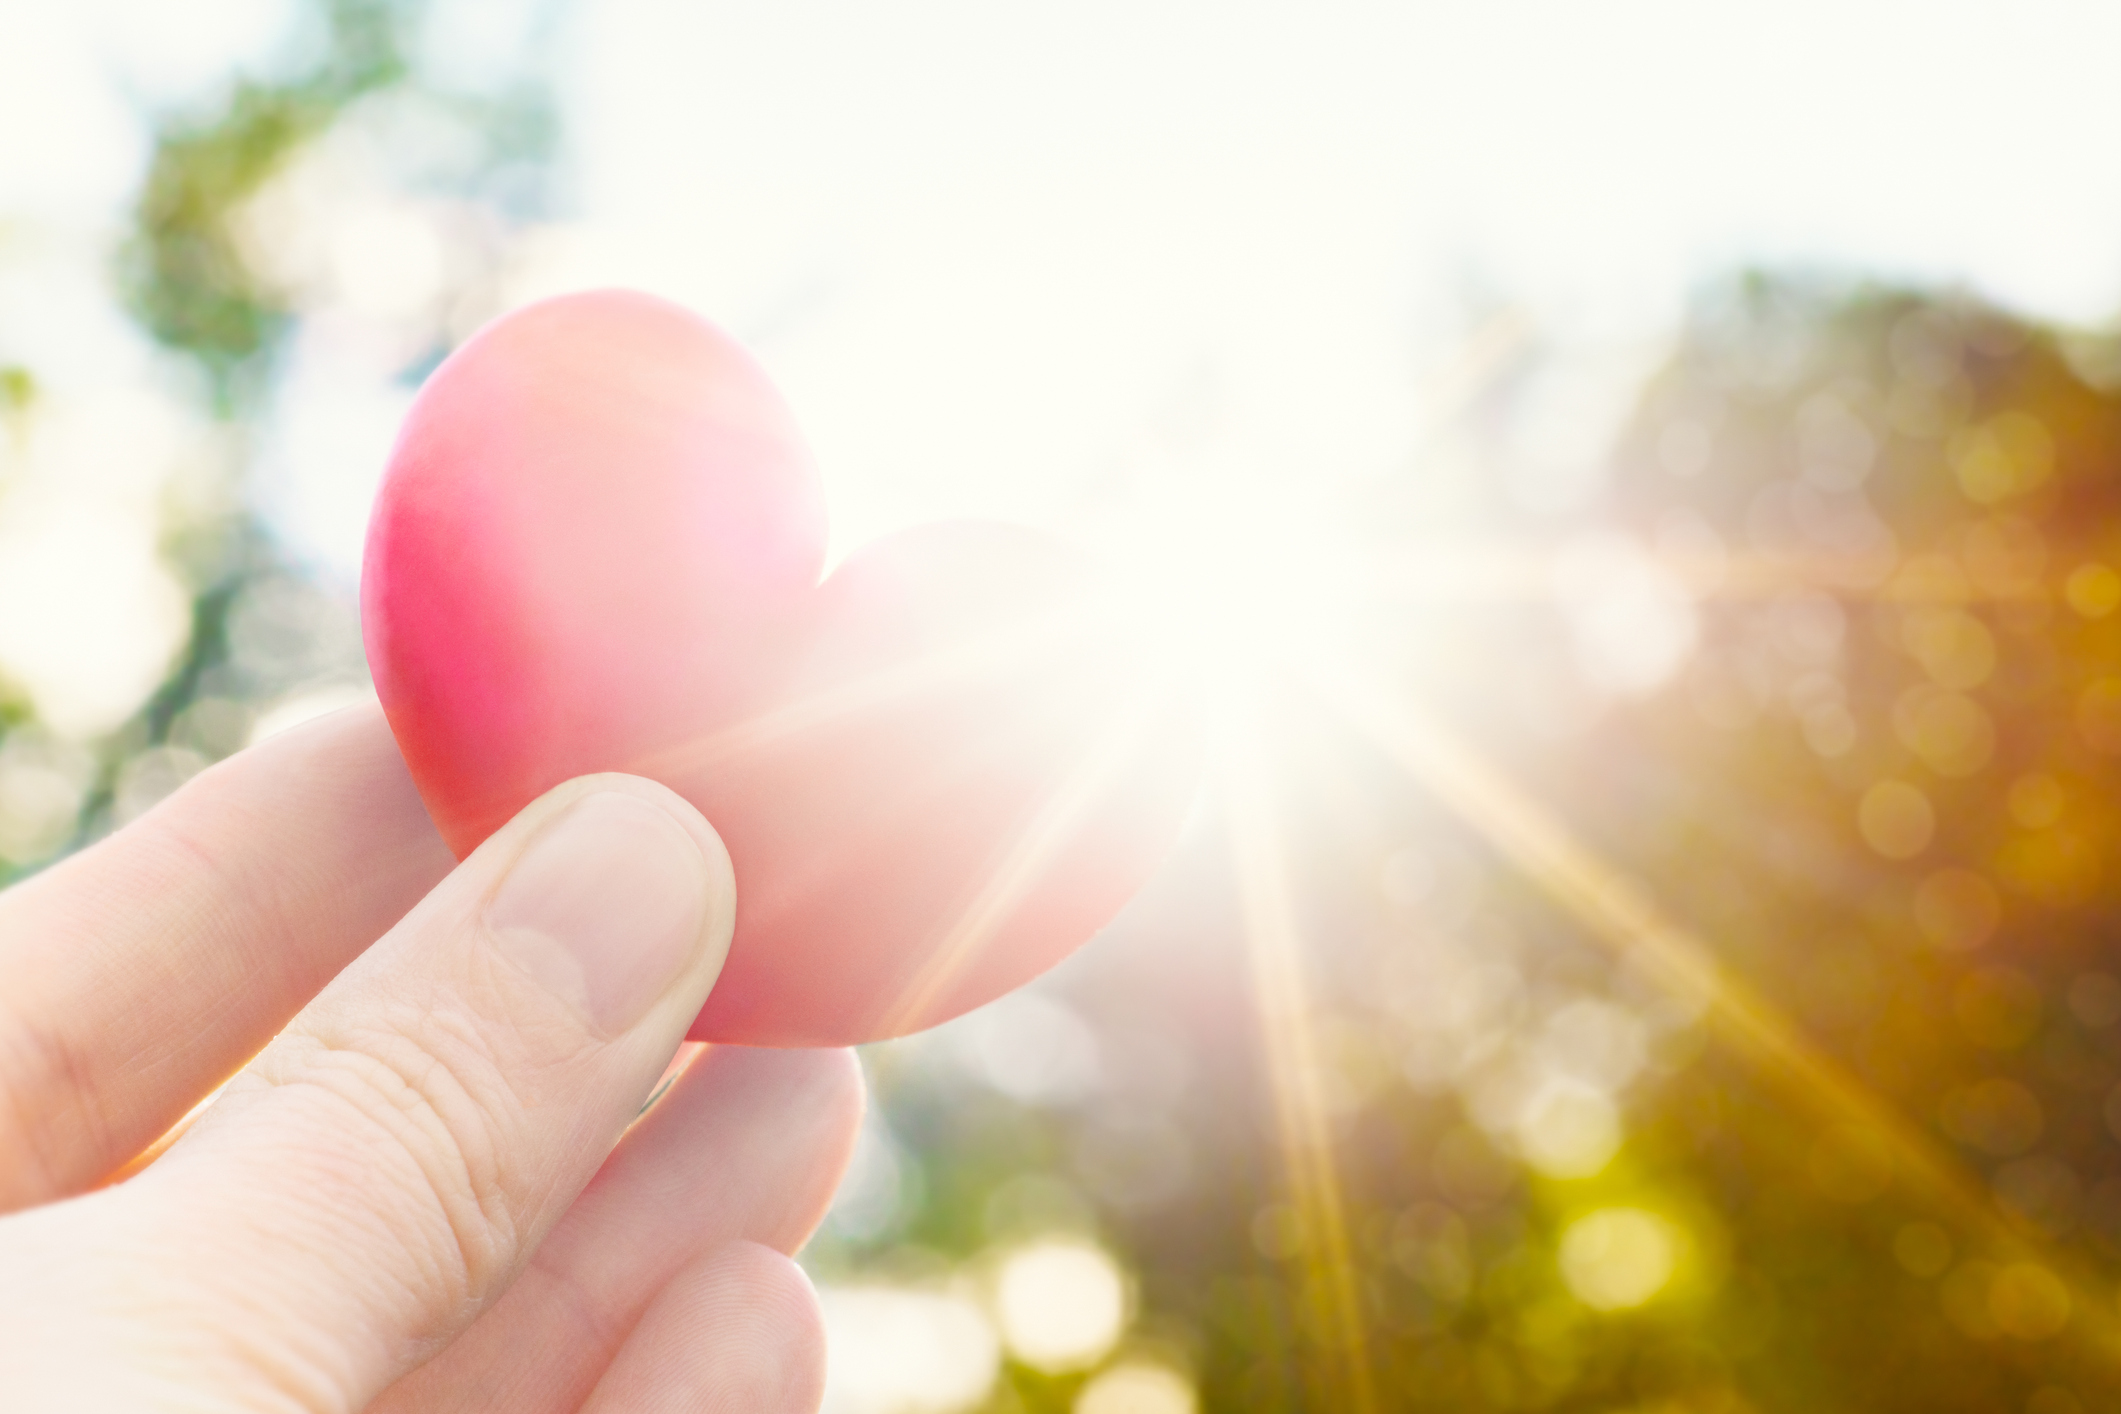 Unrecognisable person holding heart shaped plum against the sun. Love concept lifestyle image with sun flare. Valentine&#8217;s day background.